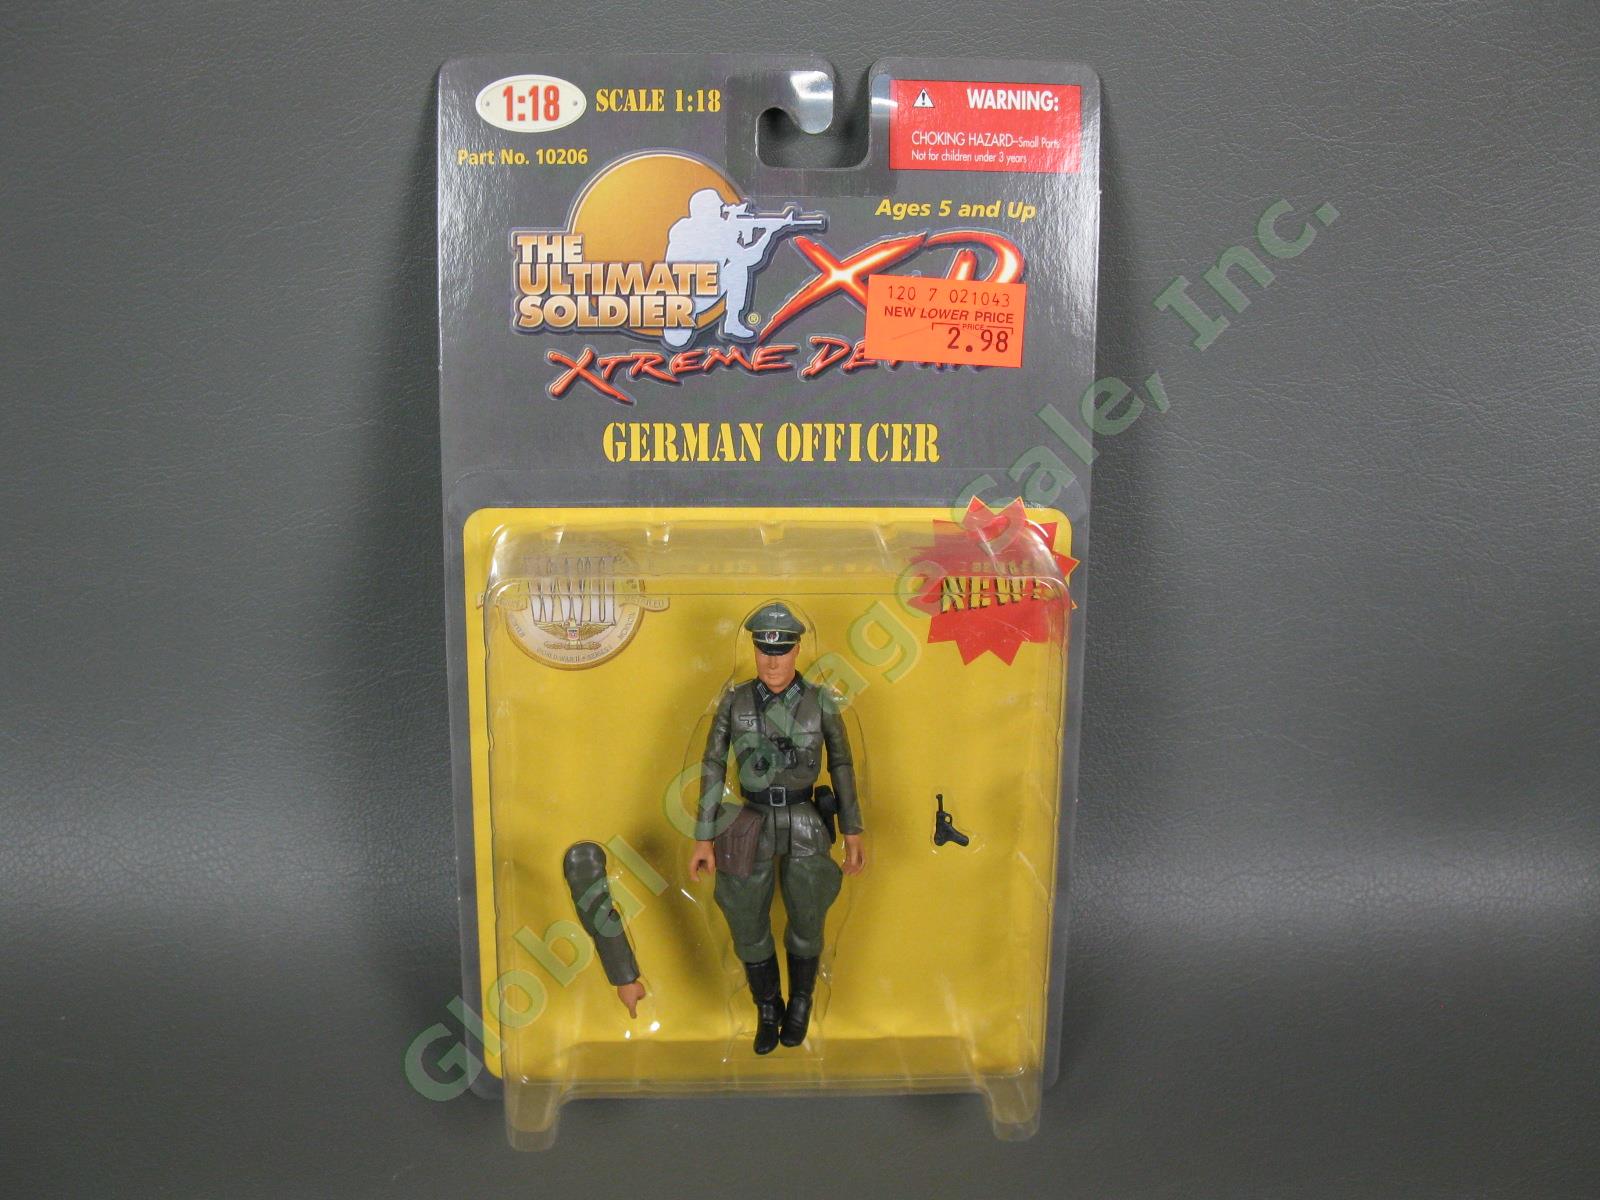 5 Ultimate Soldier WWII German Officer MP-44 Infantry Soldier Panzer Figure Set 1